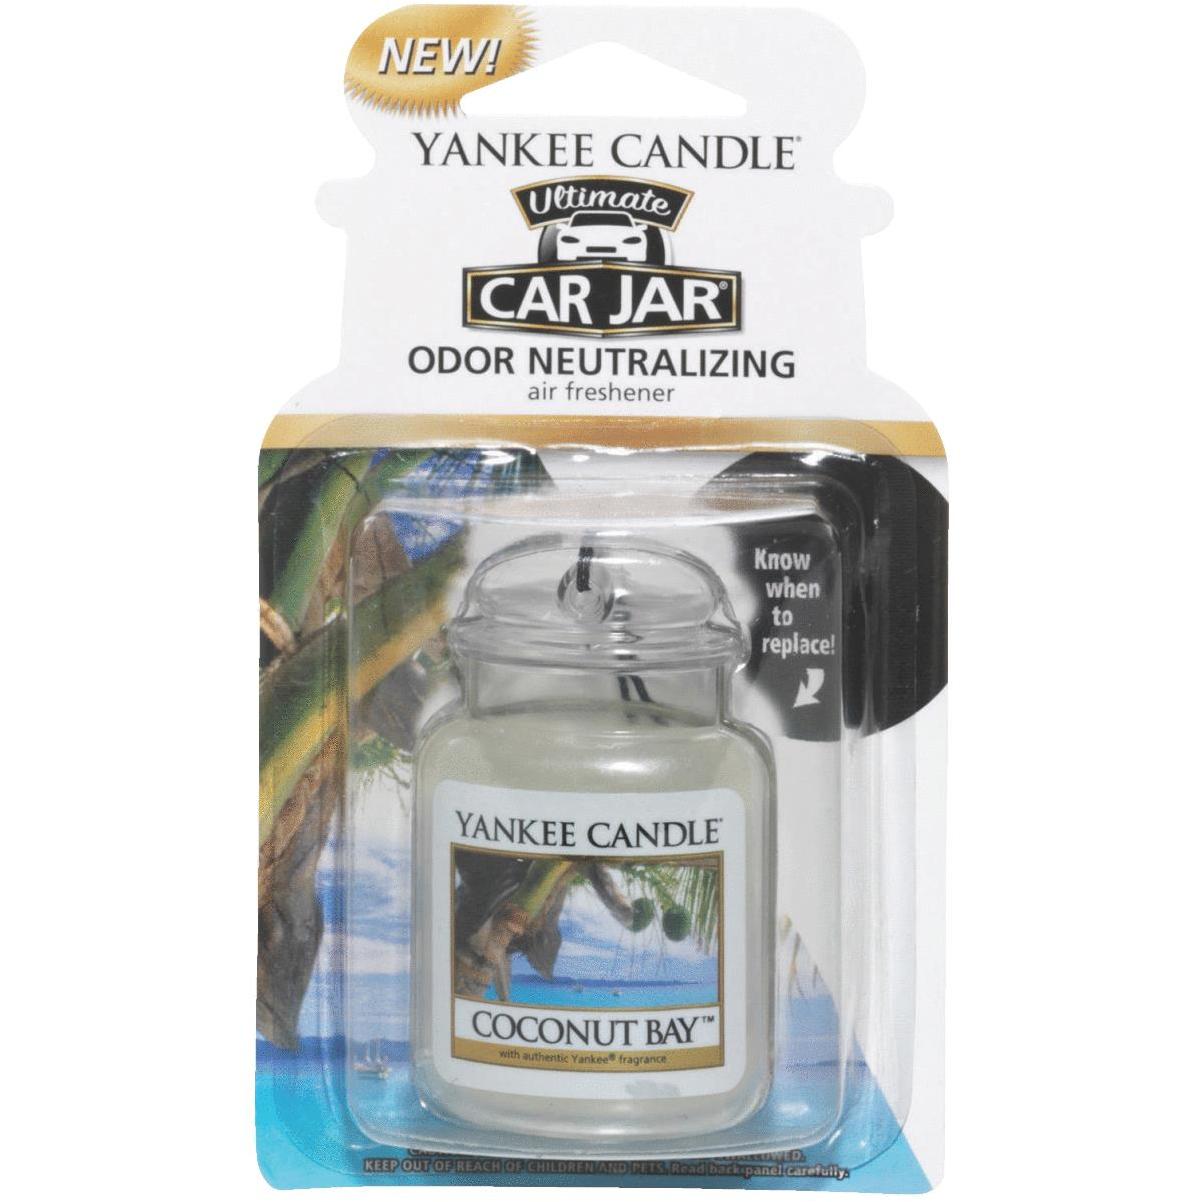 Yankee Candle Car Jar Ultimate Car Air Freshener Coconut Morganfield Home Center